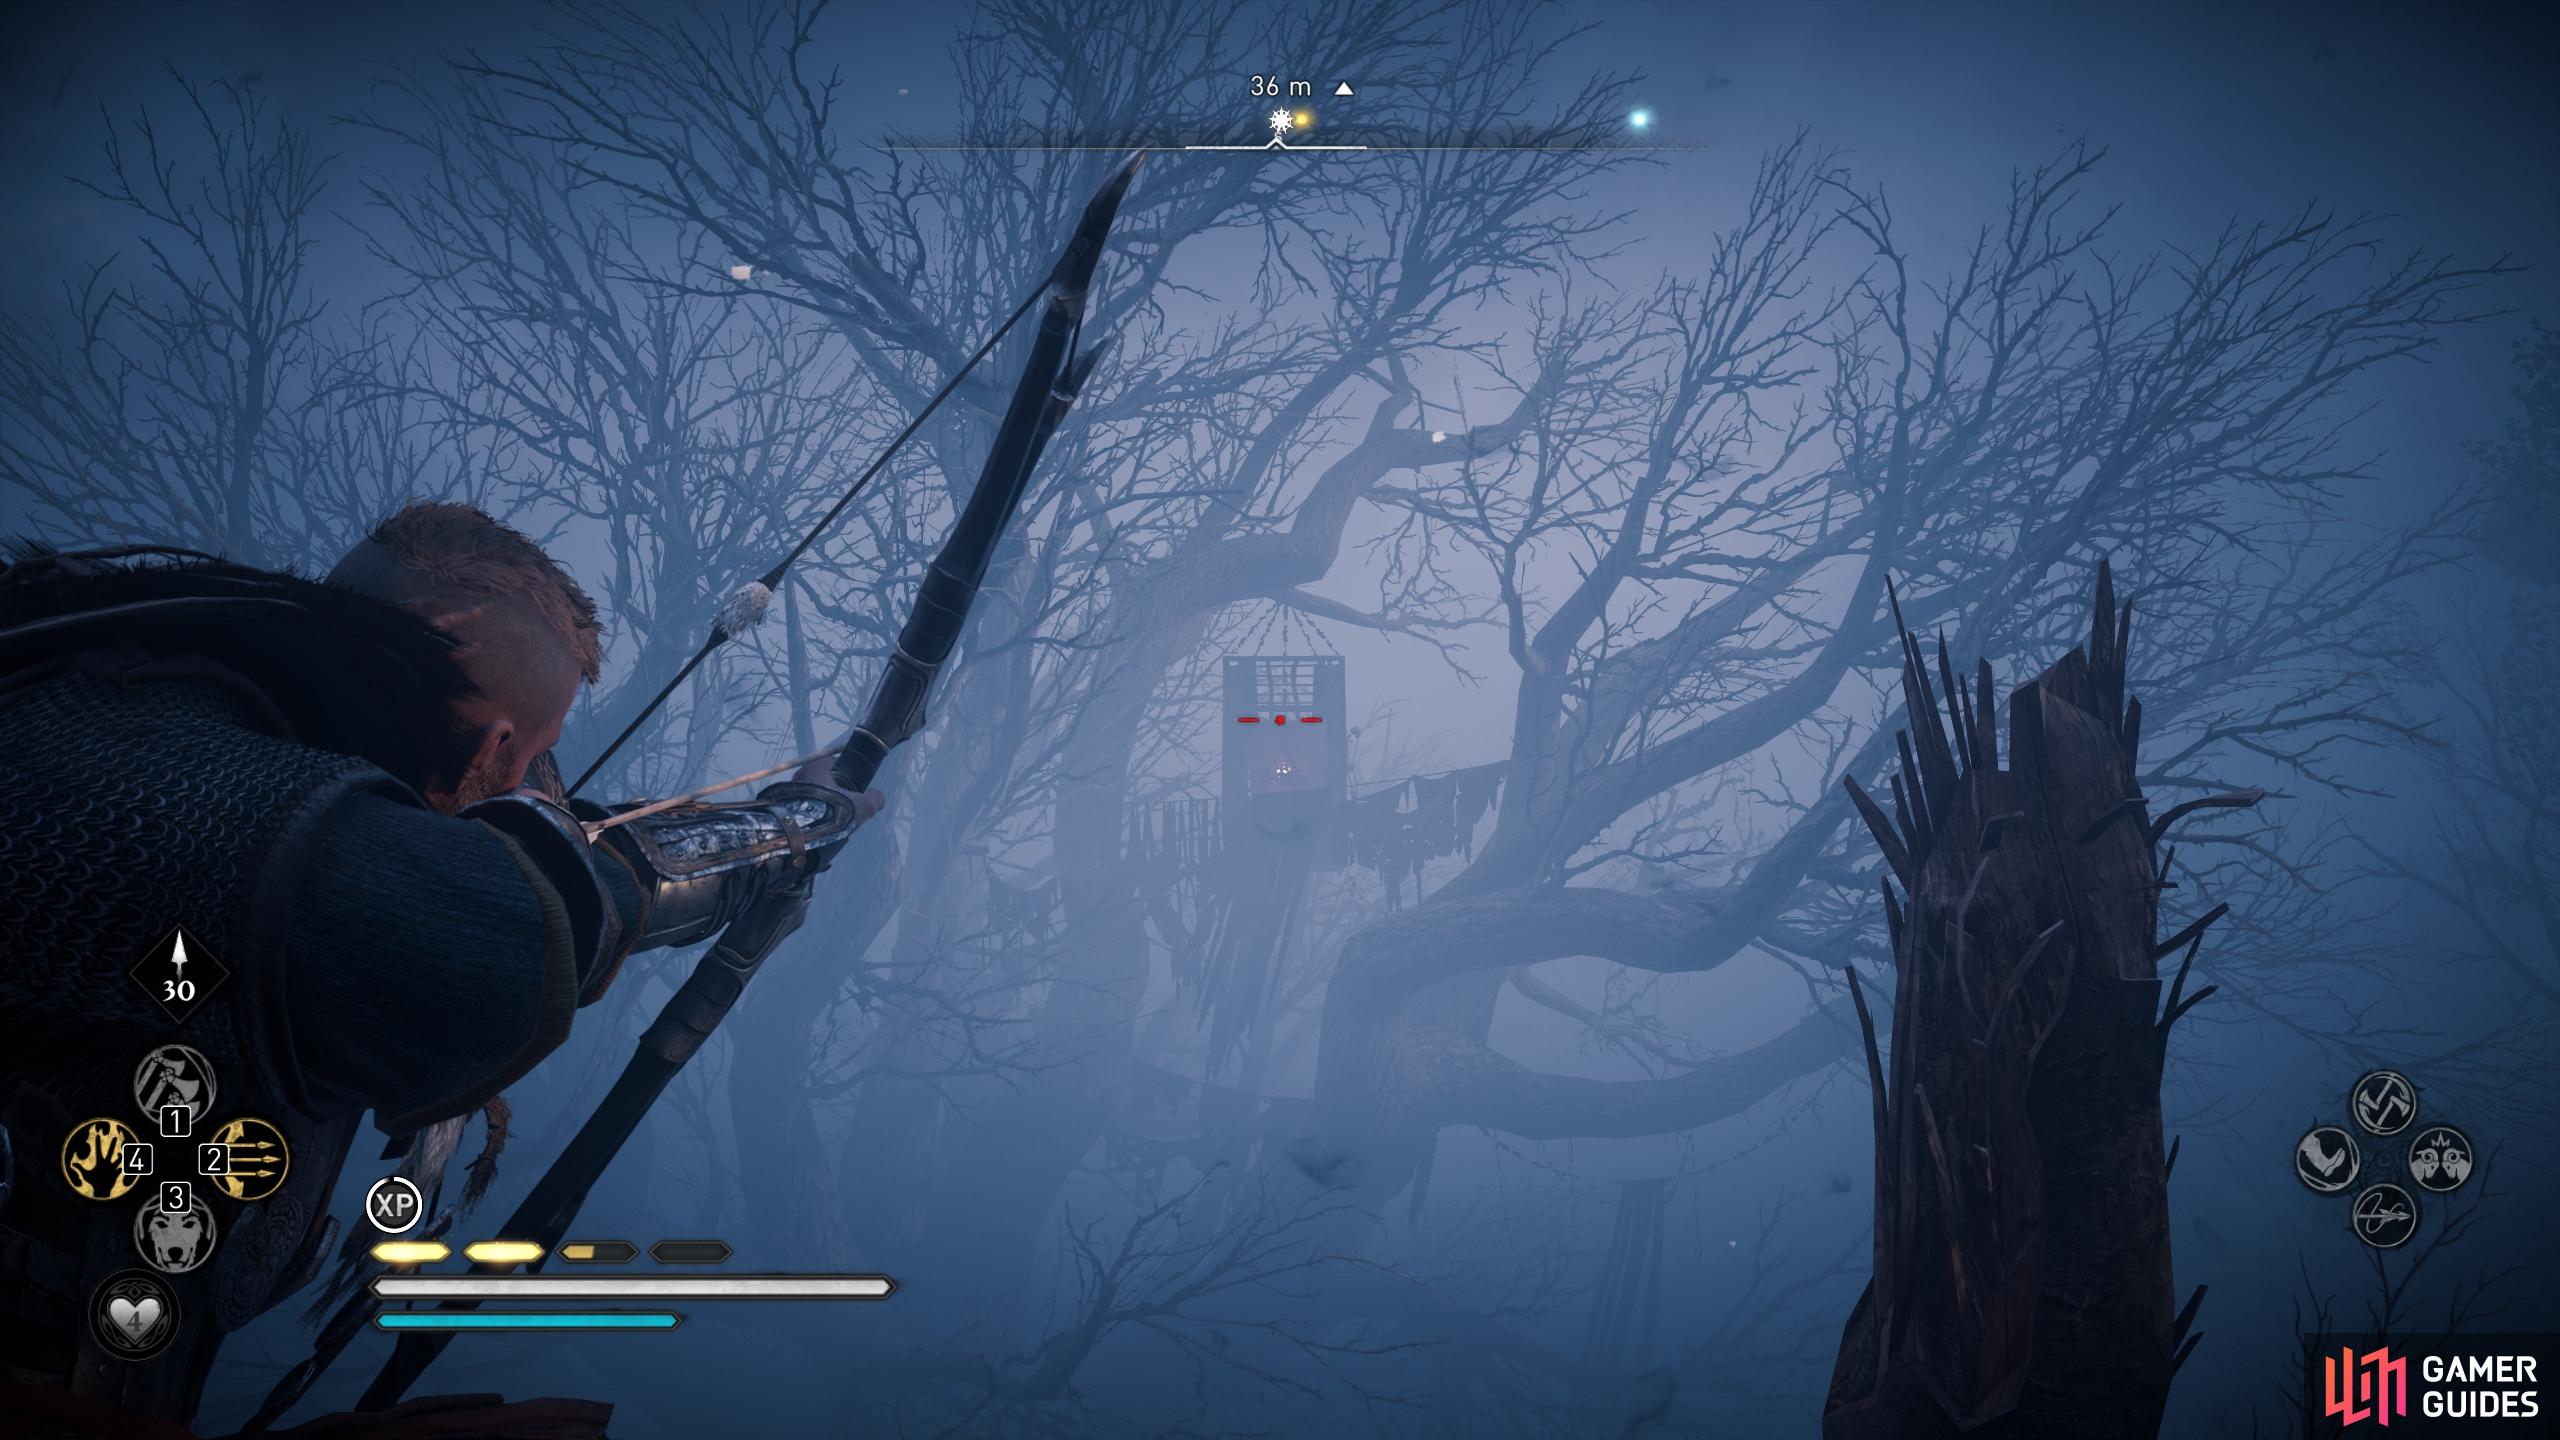 You'll need to shoot the symbol from the northern side of the tree.